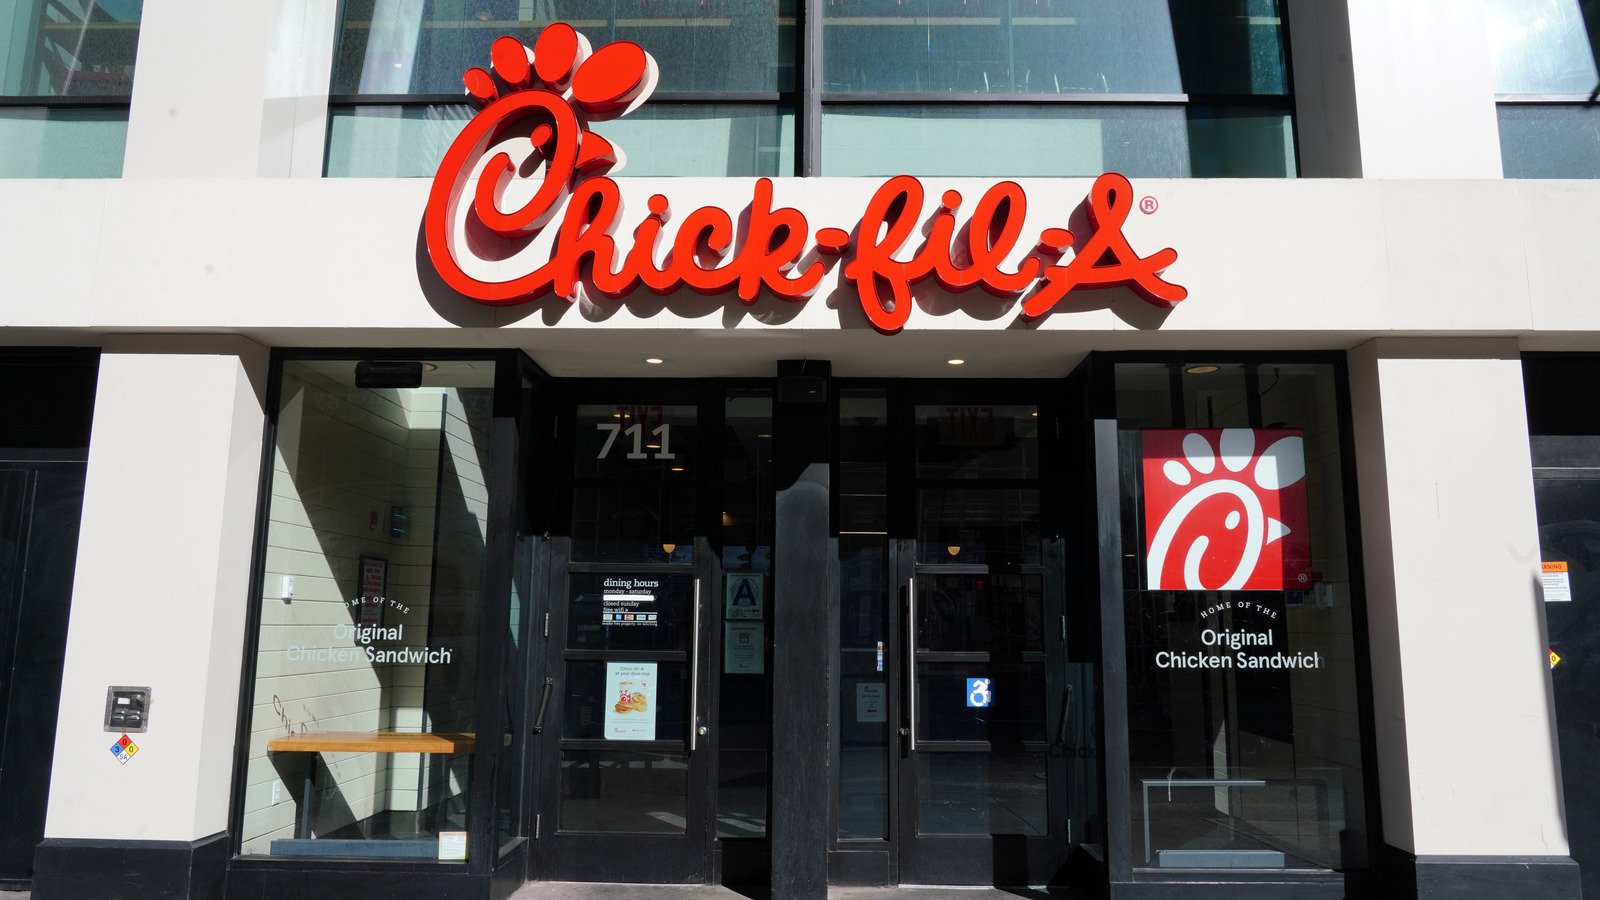 What Actually Happens If You Say 'My Pleasure' To A Chick-Fil-A Employee - Mashed